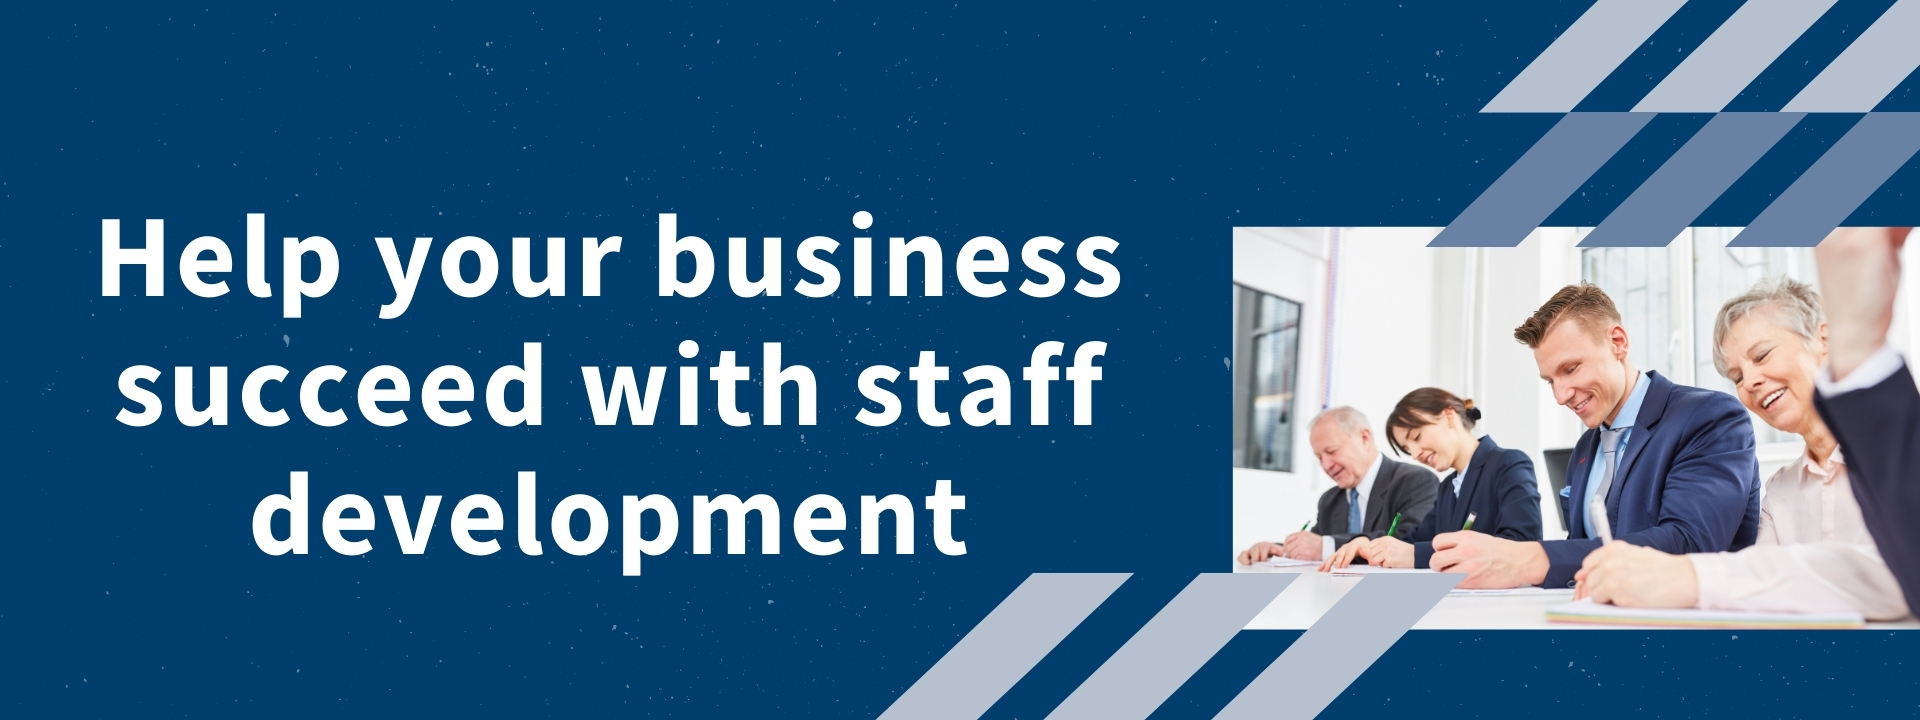 Help your business succeed with staff development